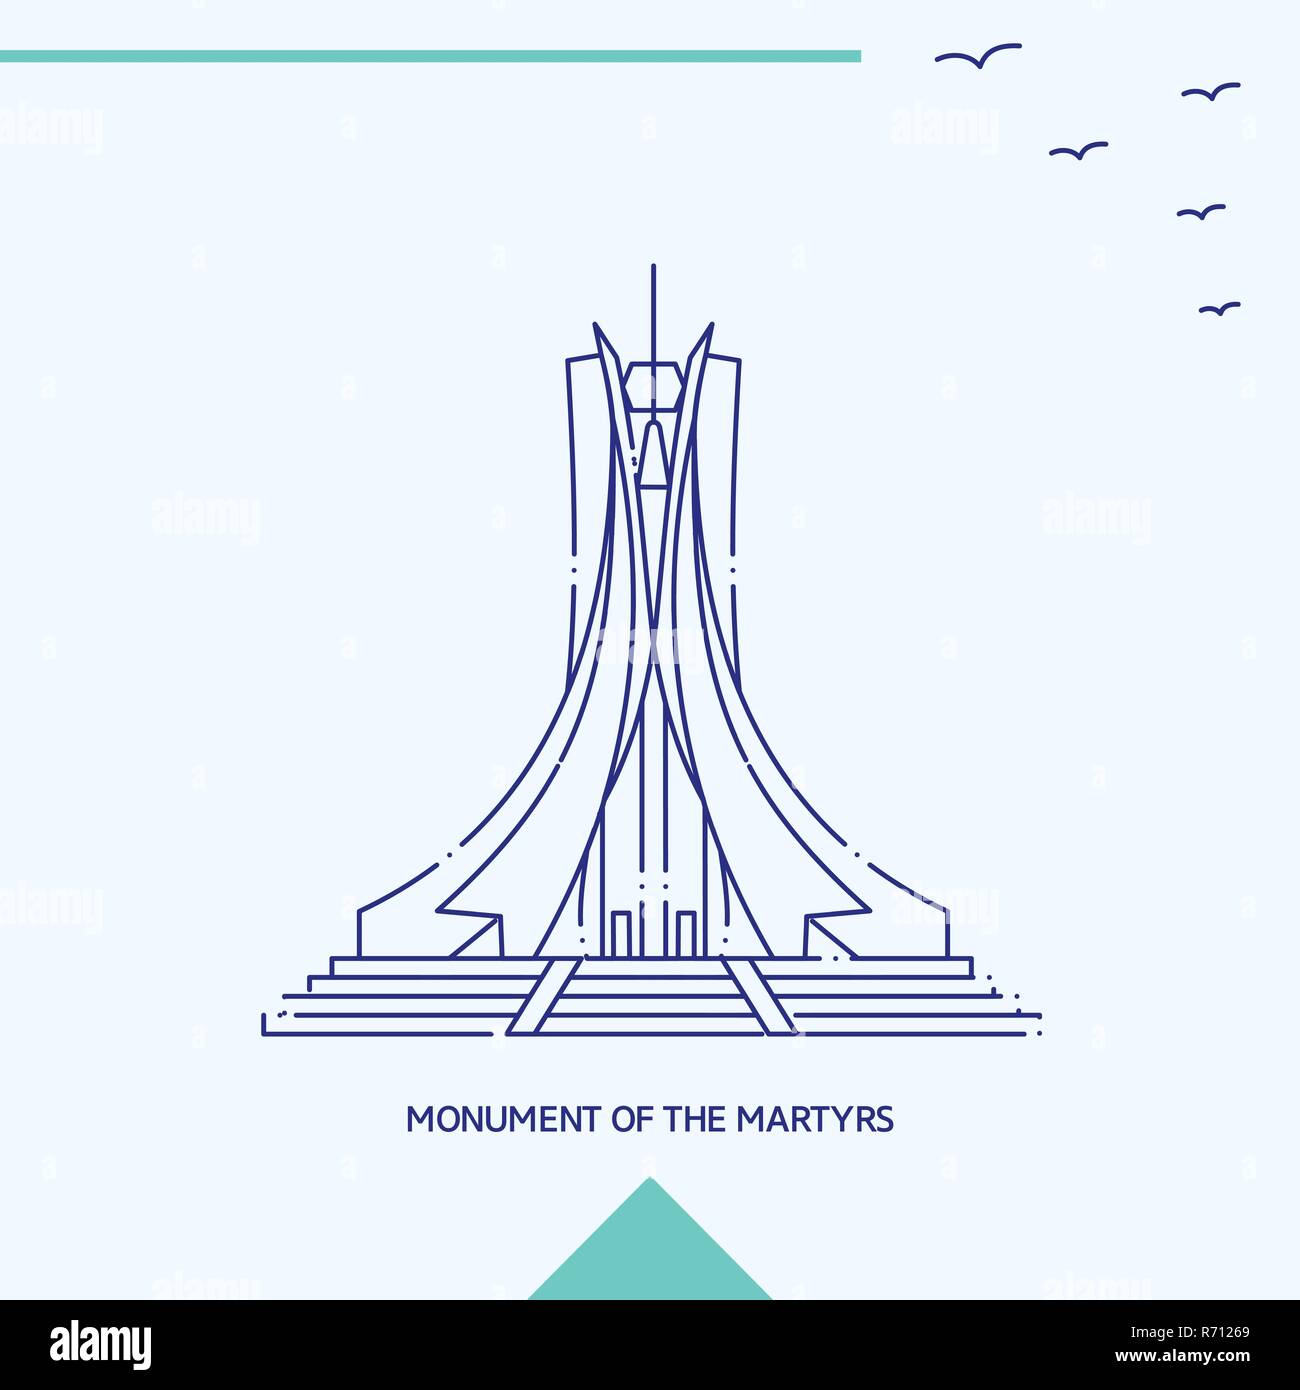 MONUMENT OF THE MARTYRS skyline vector illustration Stock Vector